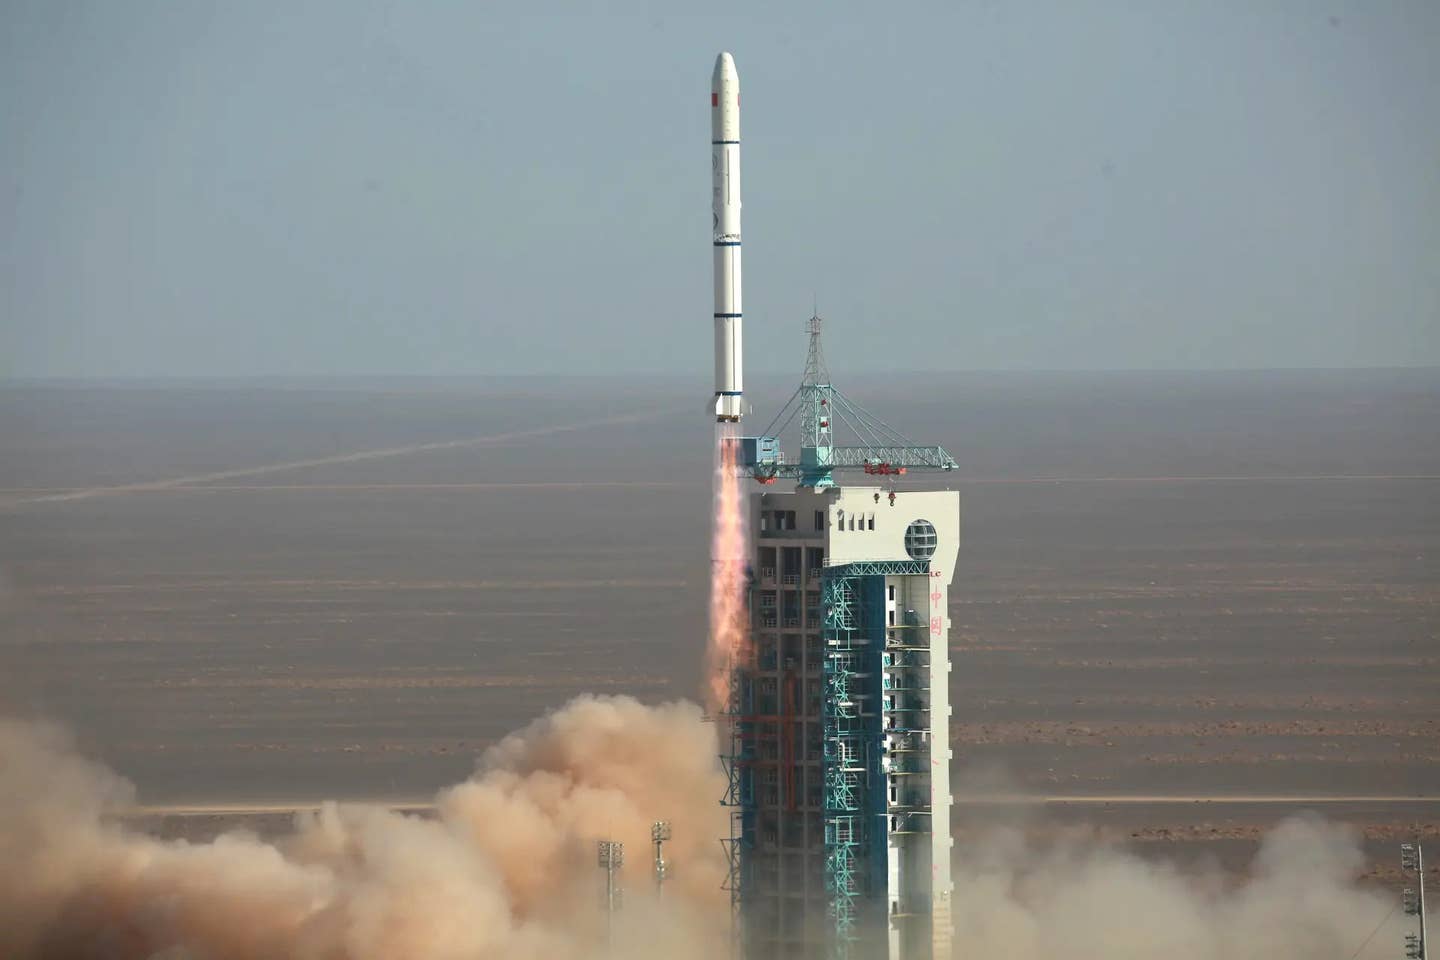 Long March 2C space launch rockets, like the one seen here, have reportedly been used in at least two test launches of China's fractional orbital bombardment system. The Long March 2C is notably derived from the DF-5 ICBM. <em>CCTV News</em>